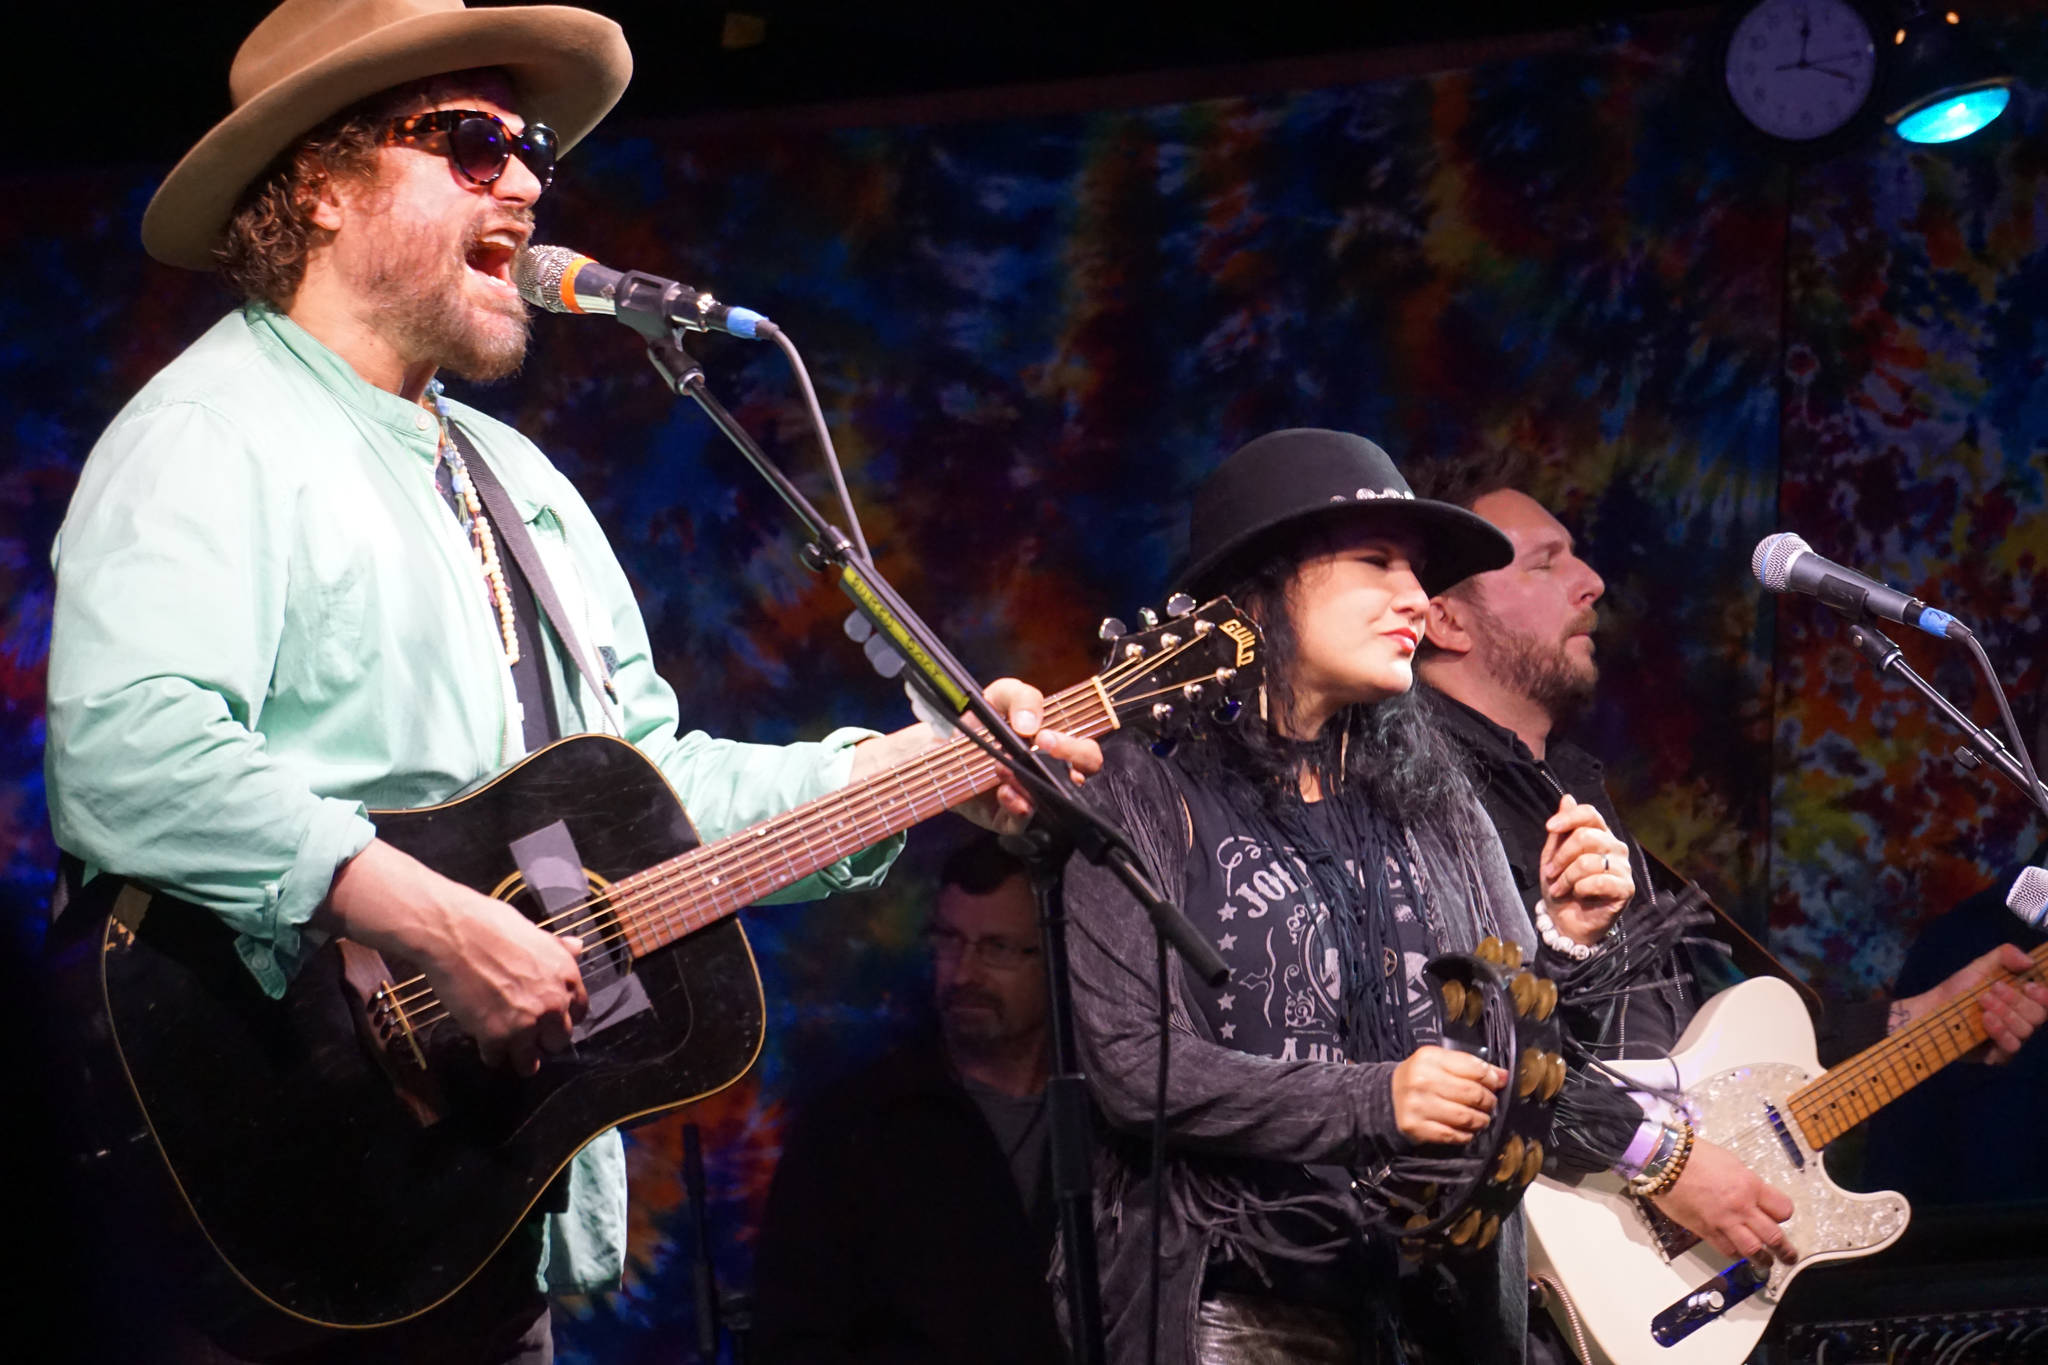 Michael Glabicki, left, Liz Berlin, center, and Dirk Miller, right, of Rusted Root perform on Saturday night, Aug. 5, 2017, at Salmonfest, Ninilchik, Alaska. (Photo by Michael Armstrong, Homer News)